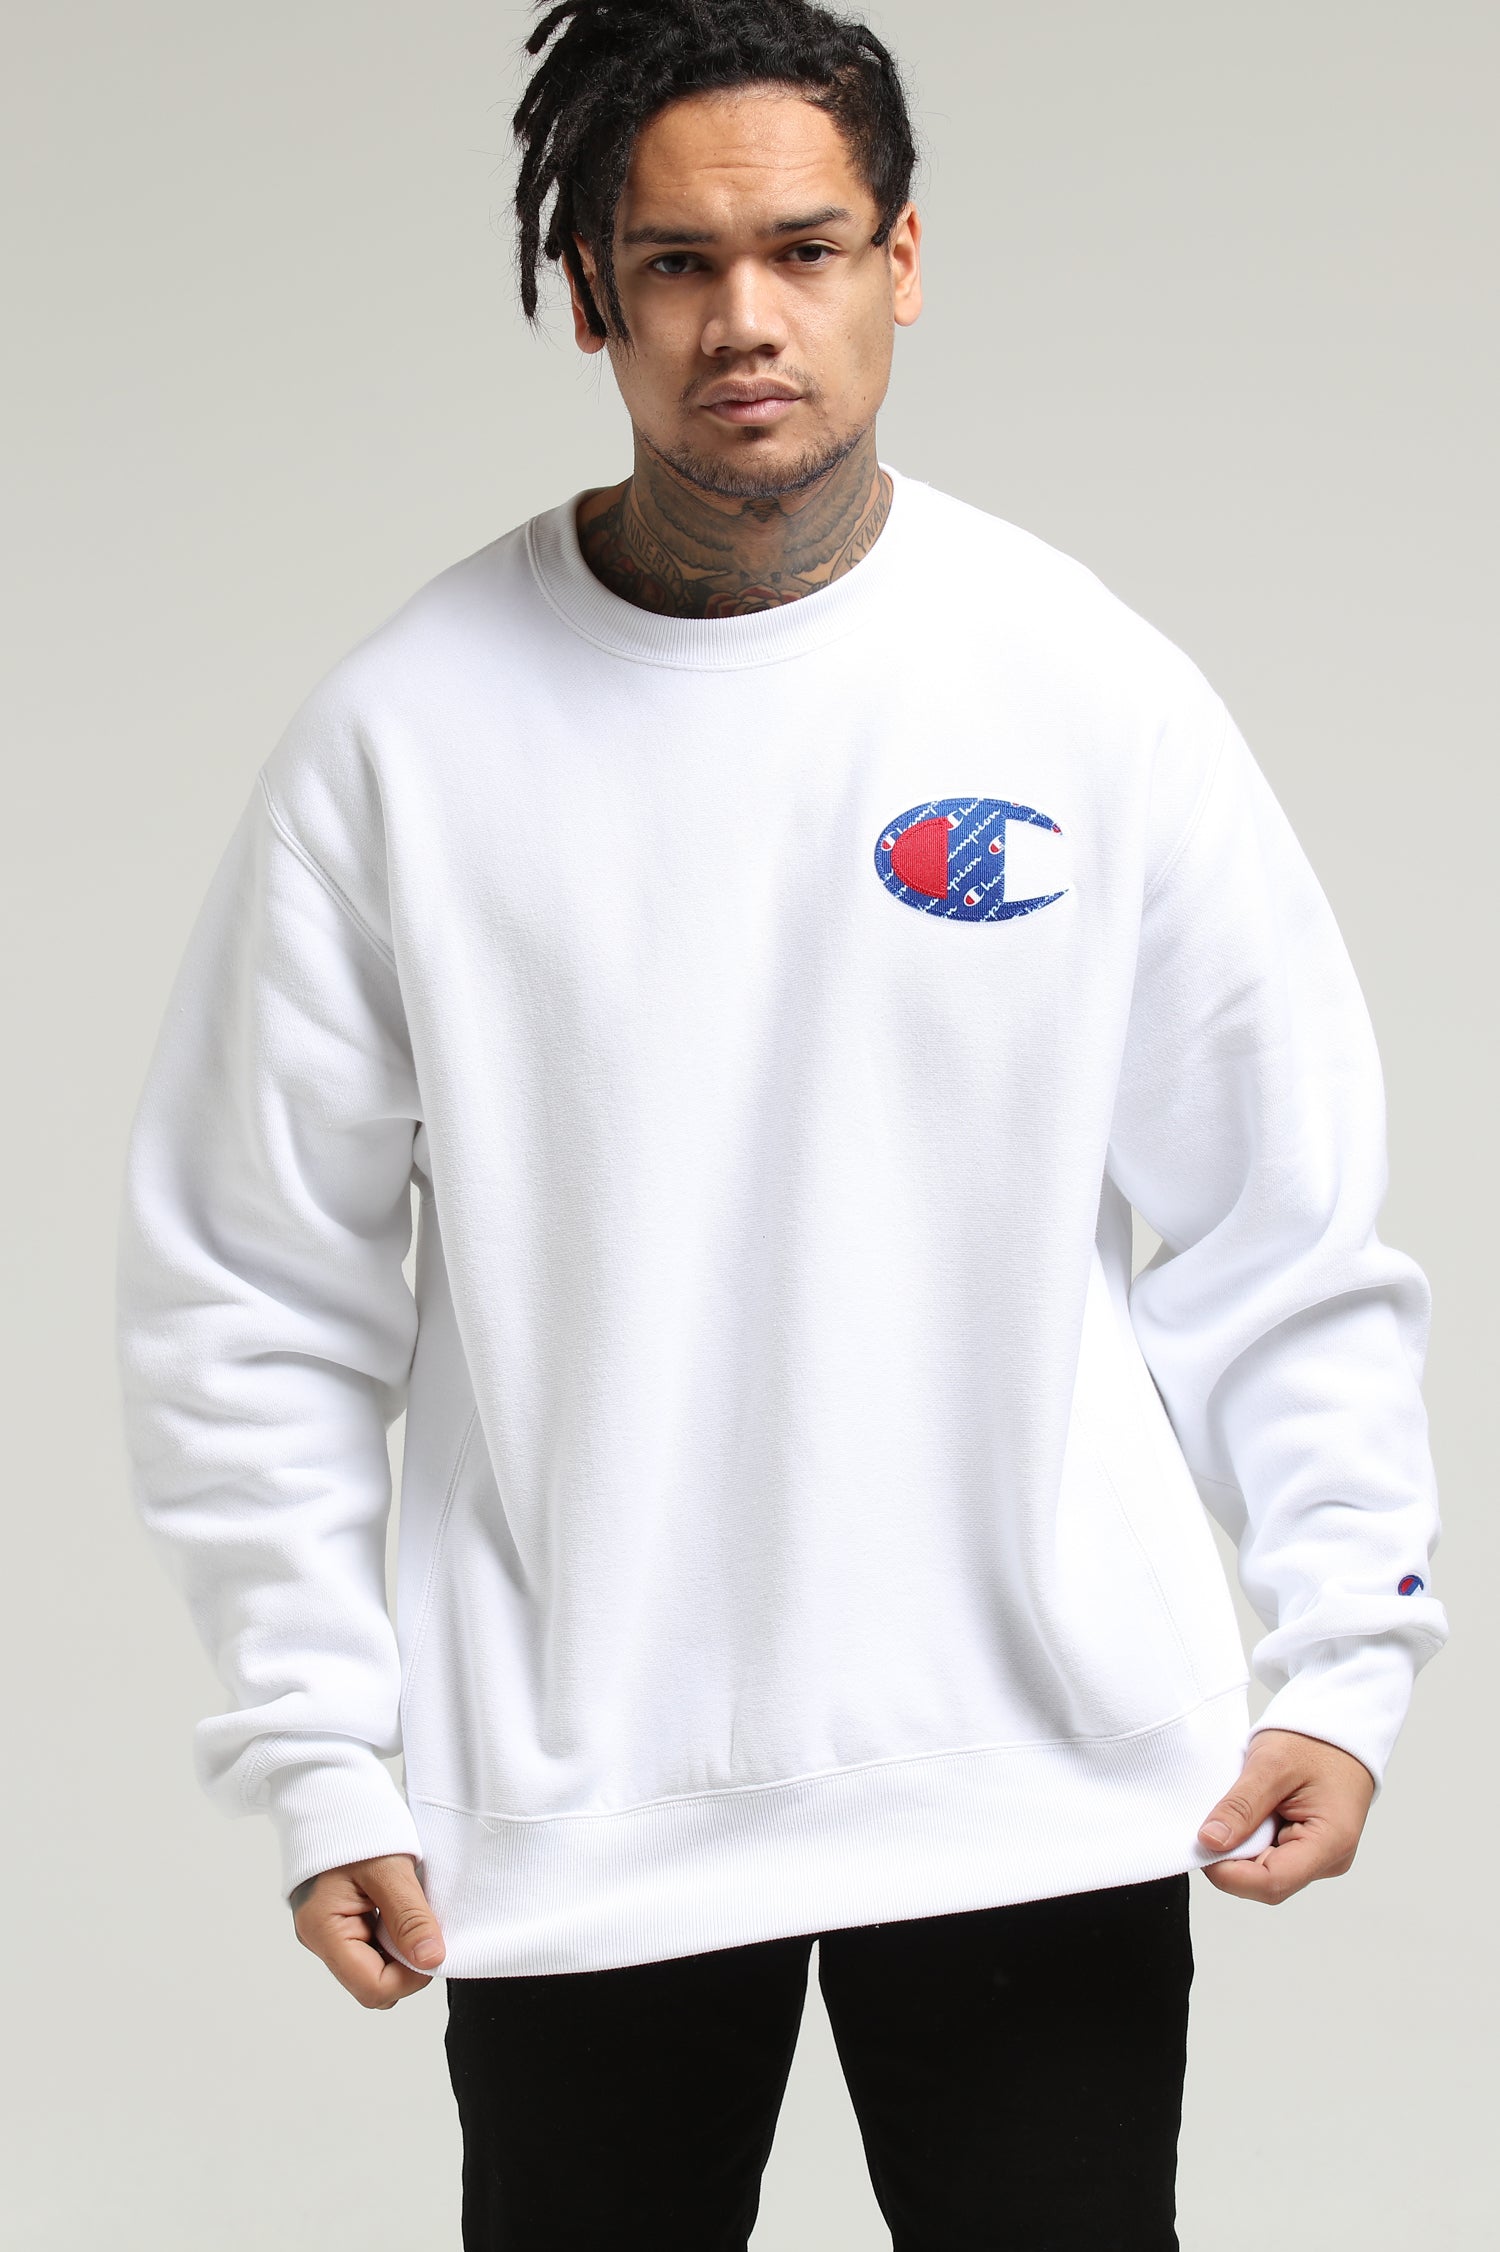 champion reverse weave sublimated white hoodie